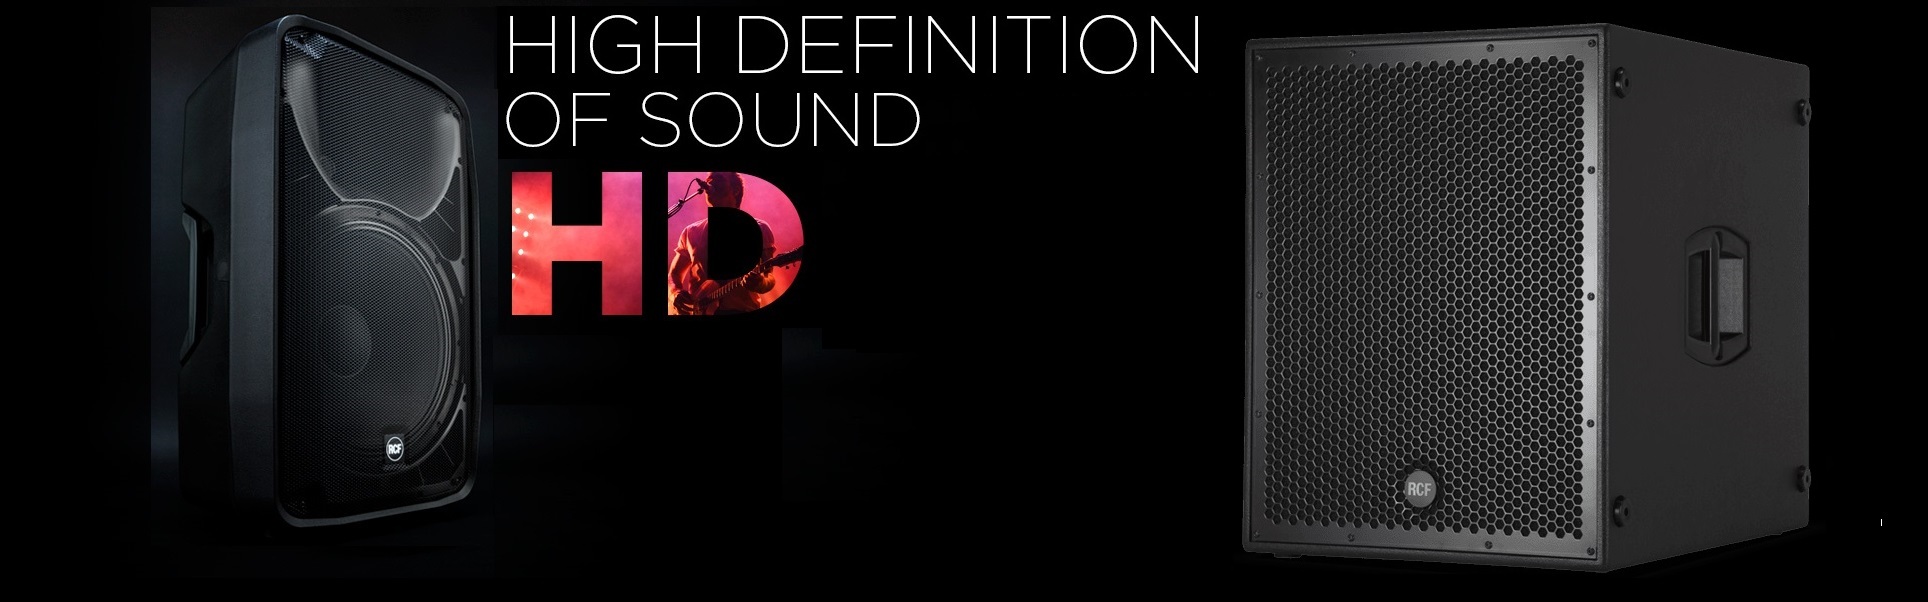 high-definition-of-sound-rcf-sub-as